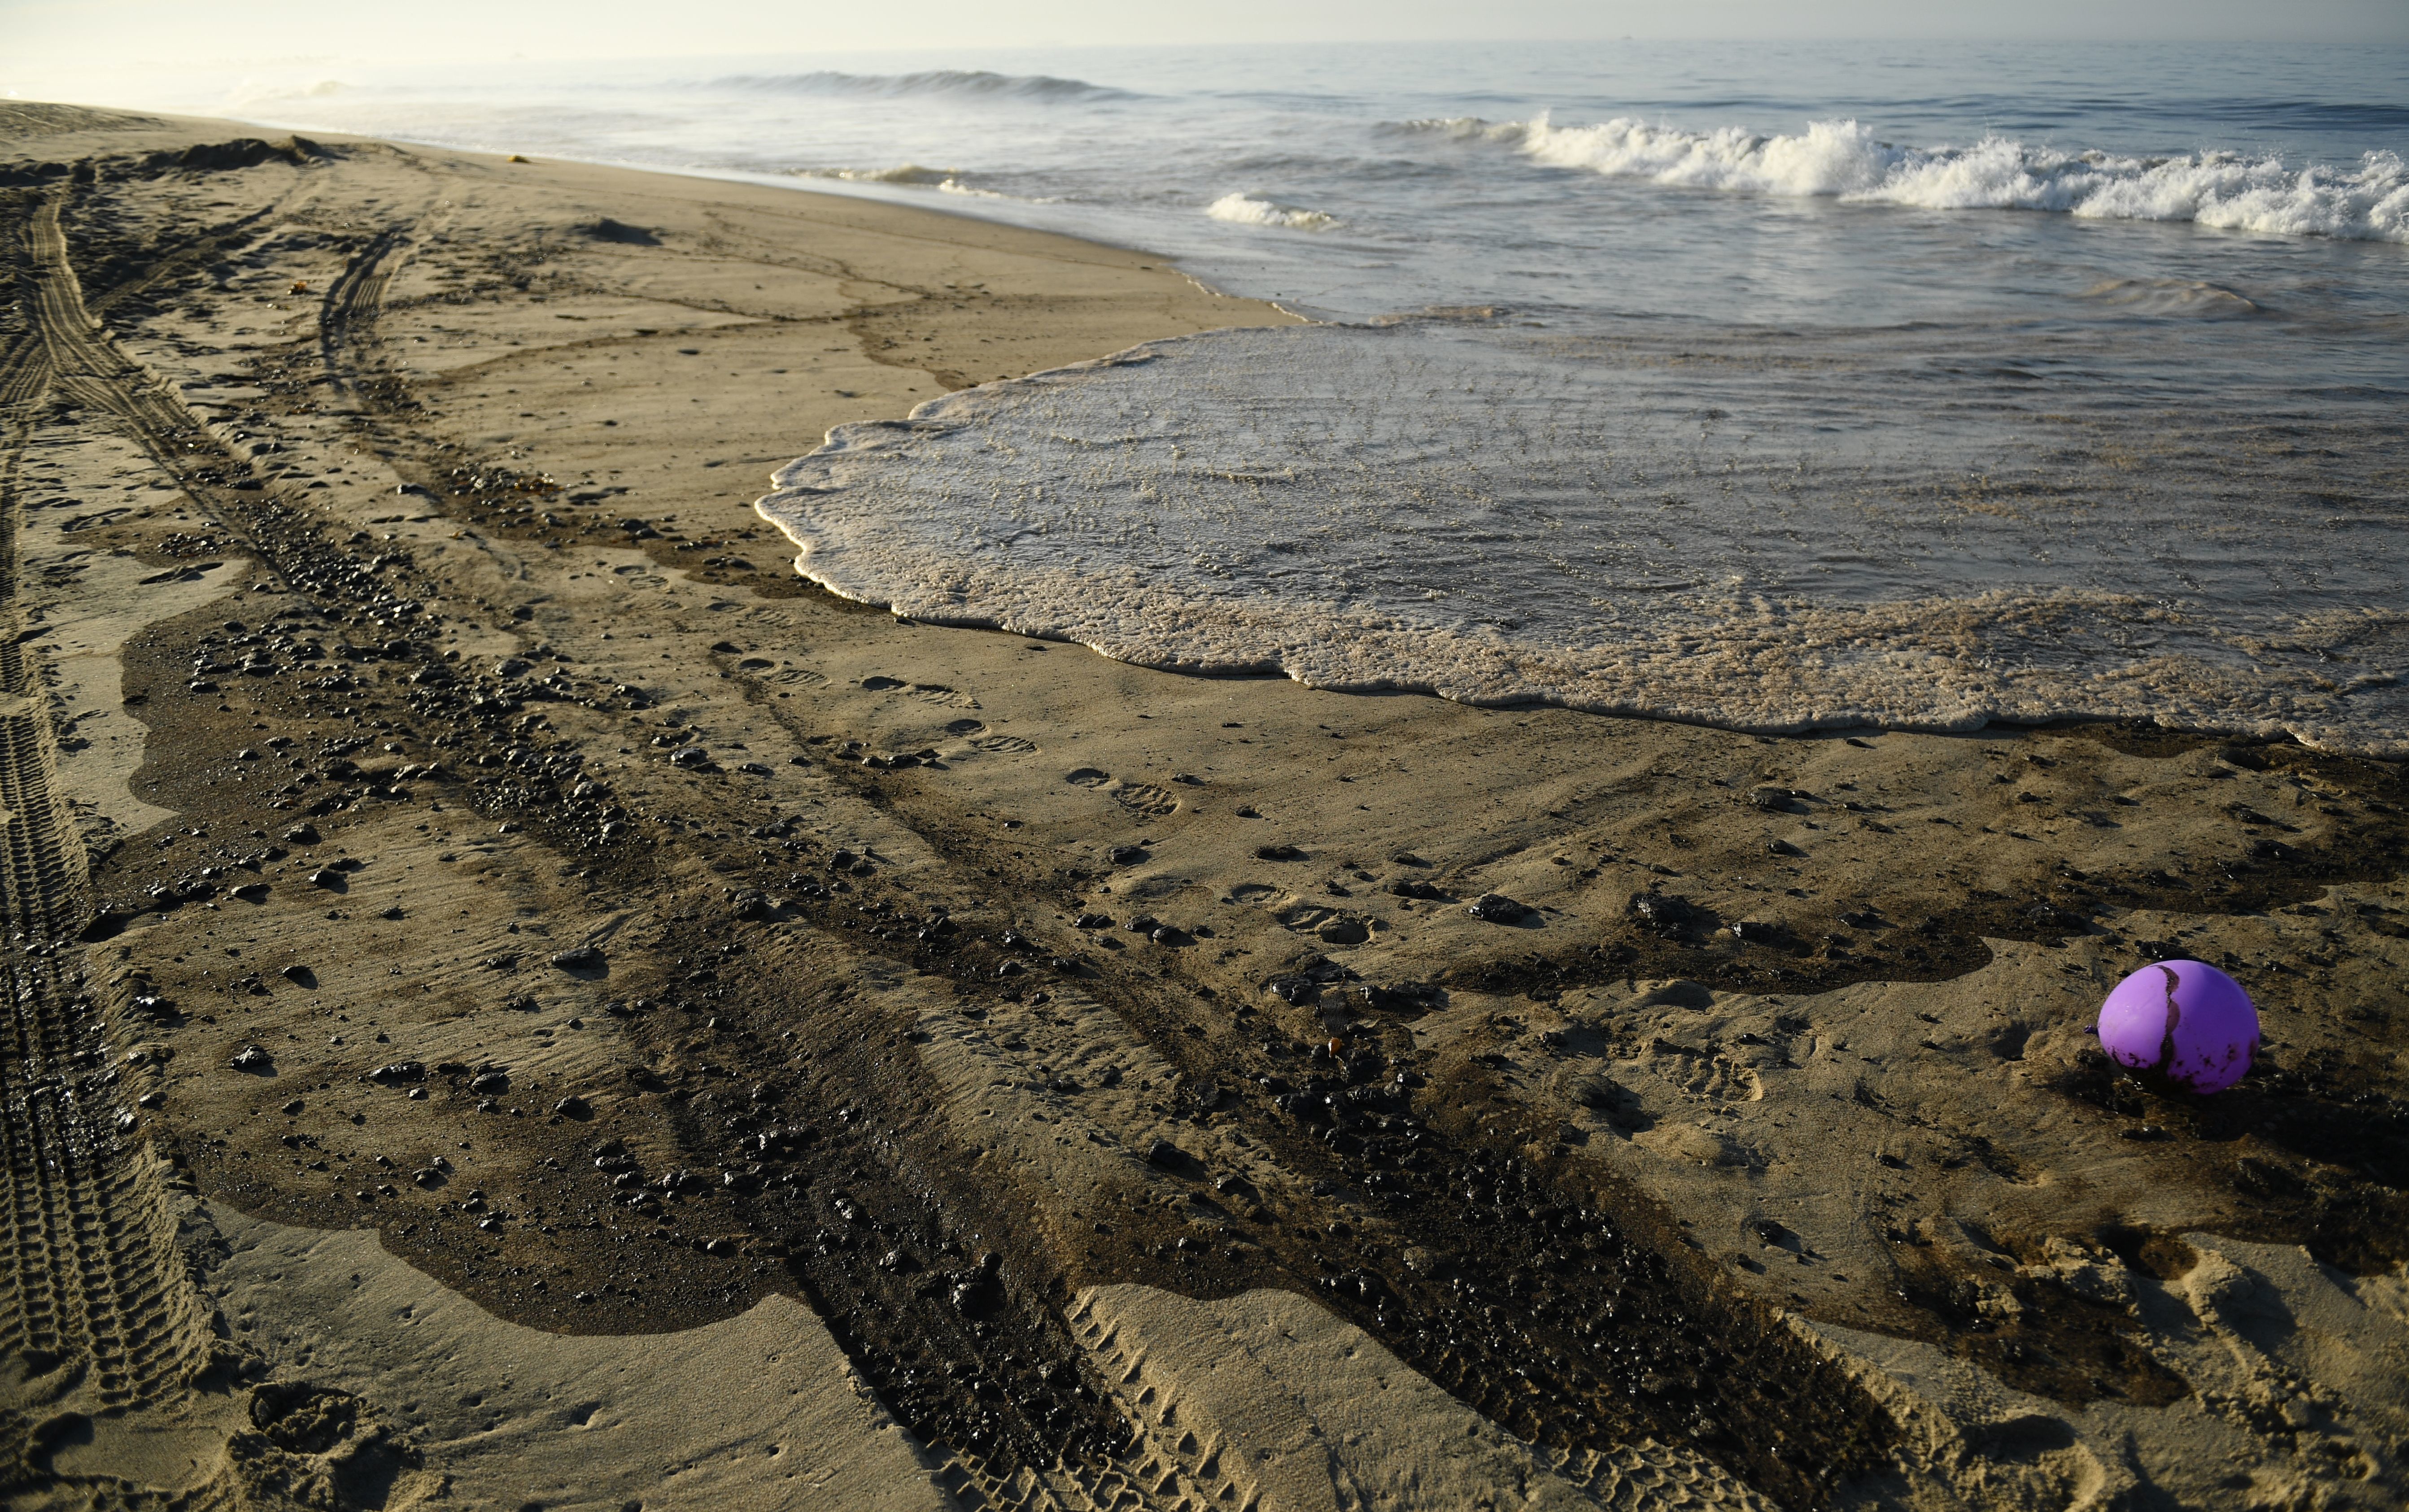 Oil is seen on the beach in Huntington Beach, California on October 3, 2021, after a pipeline breach connected to an oil rig off shore started leaking oil, according to an Orange County Supervisor.